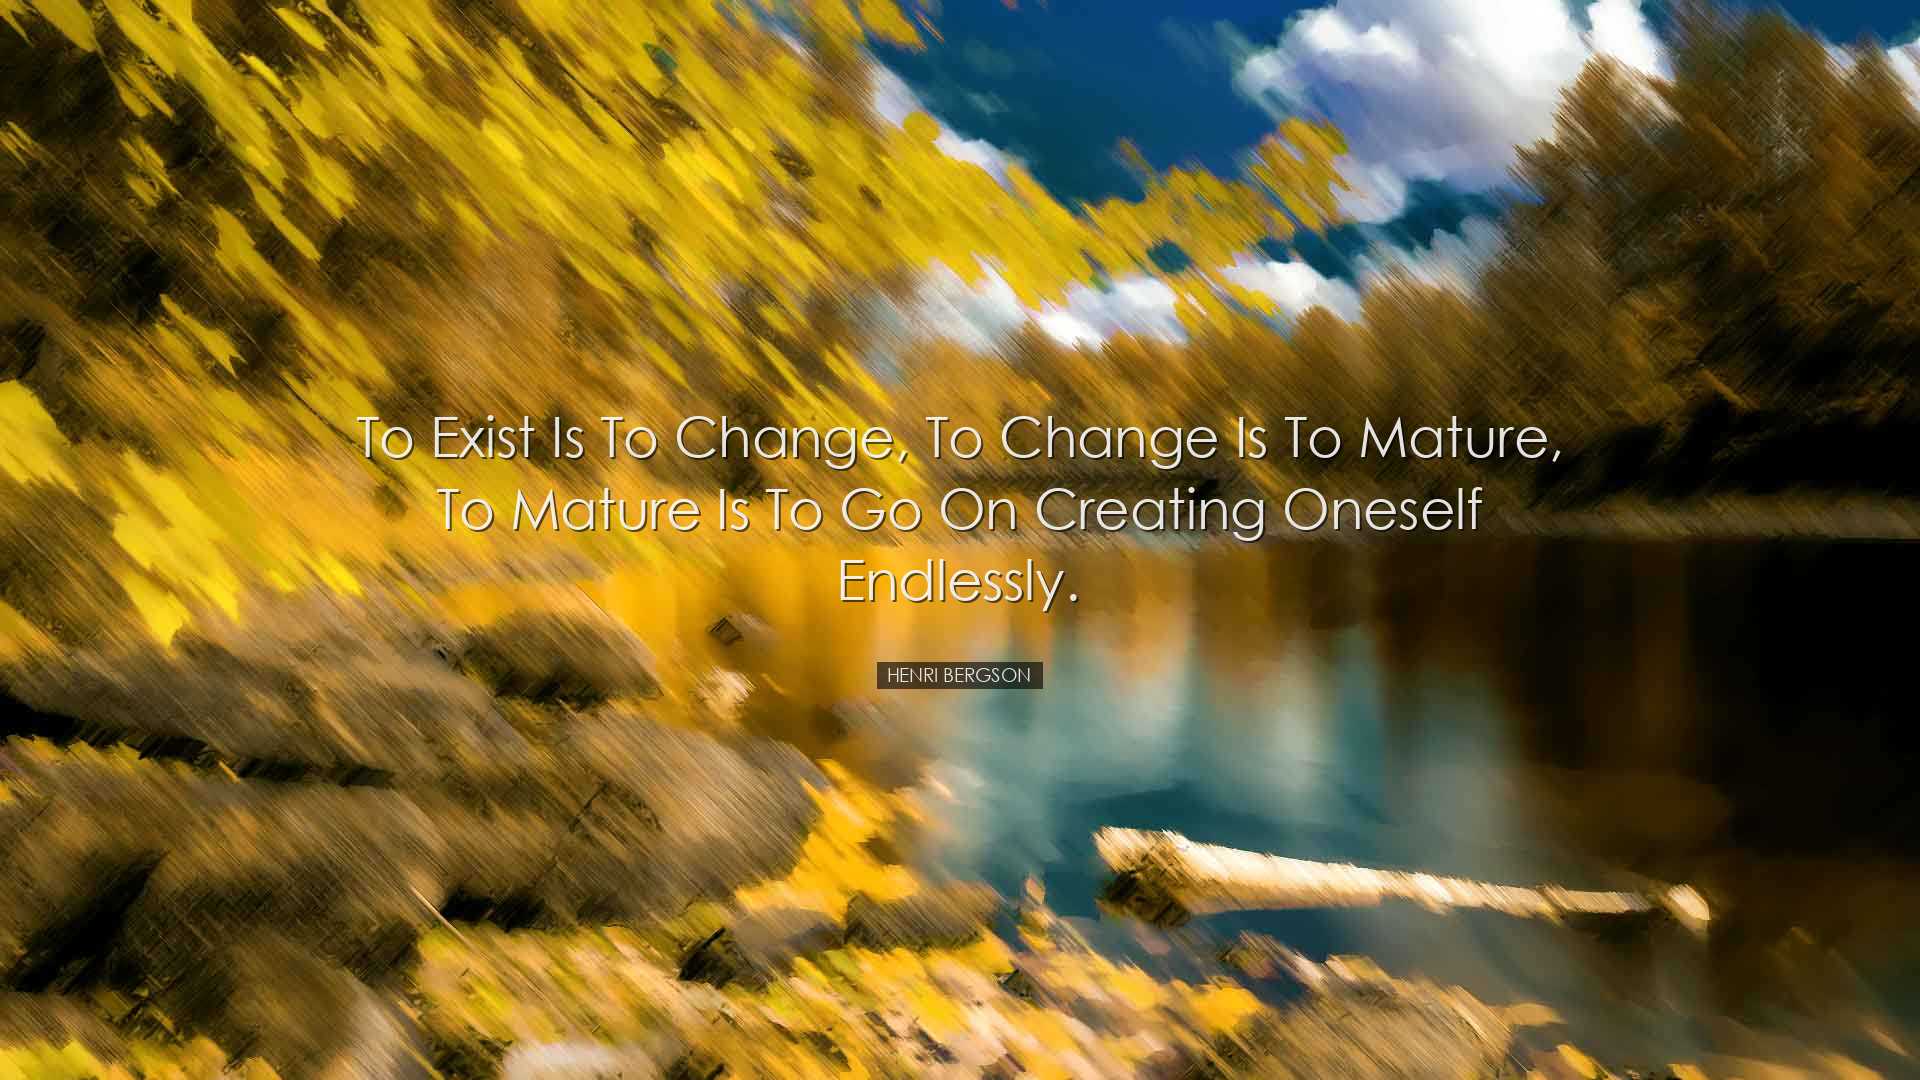 To exist is to change, to change is to mature, to mature is to go